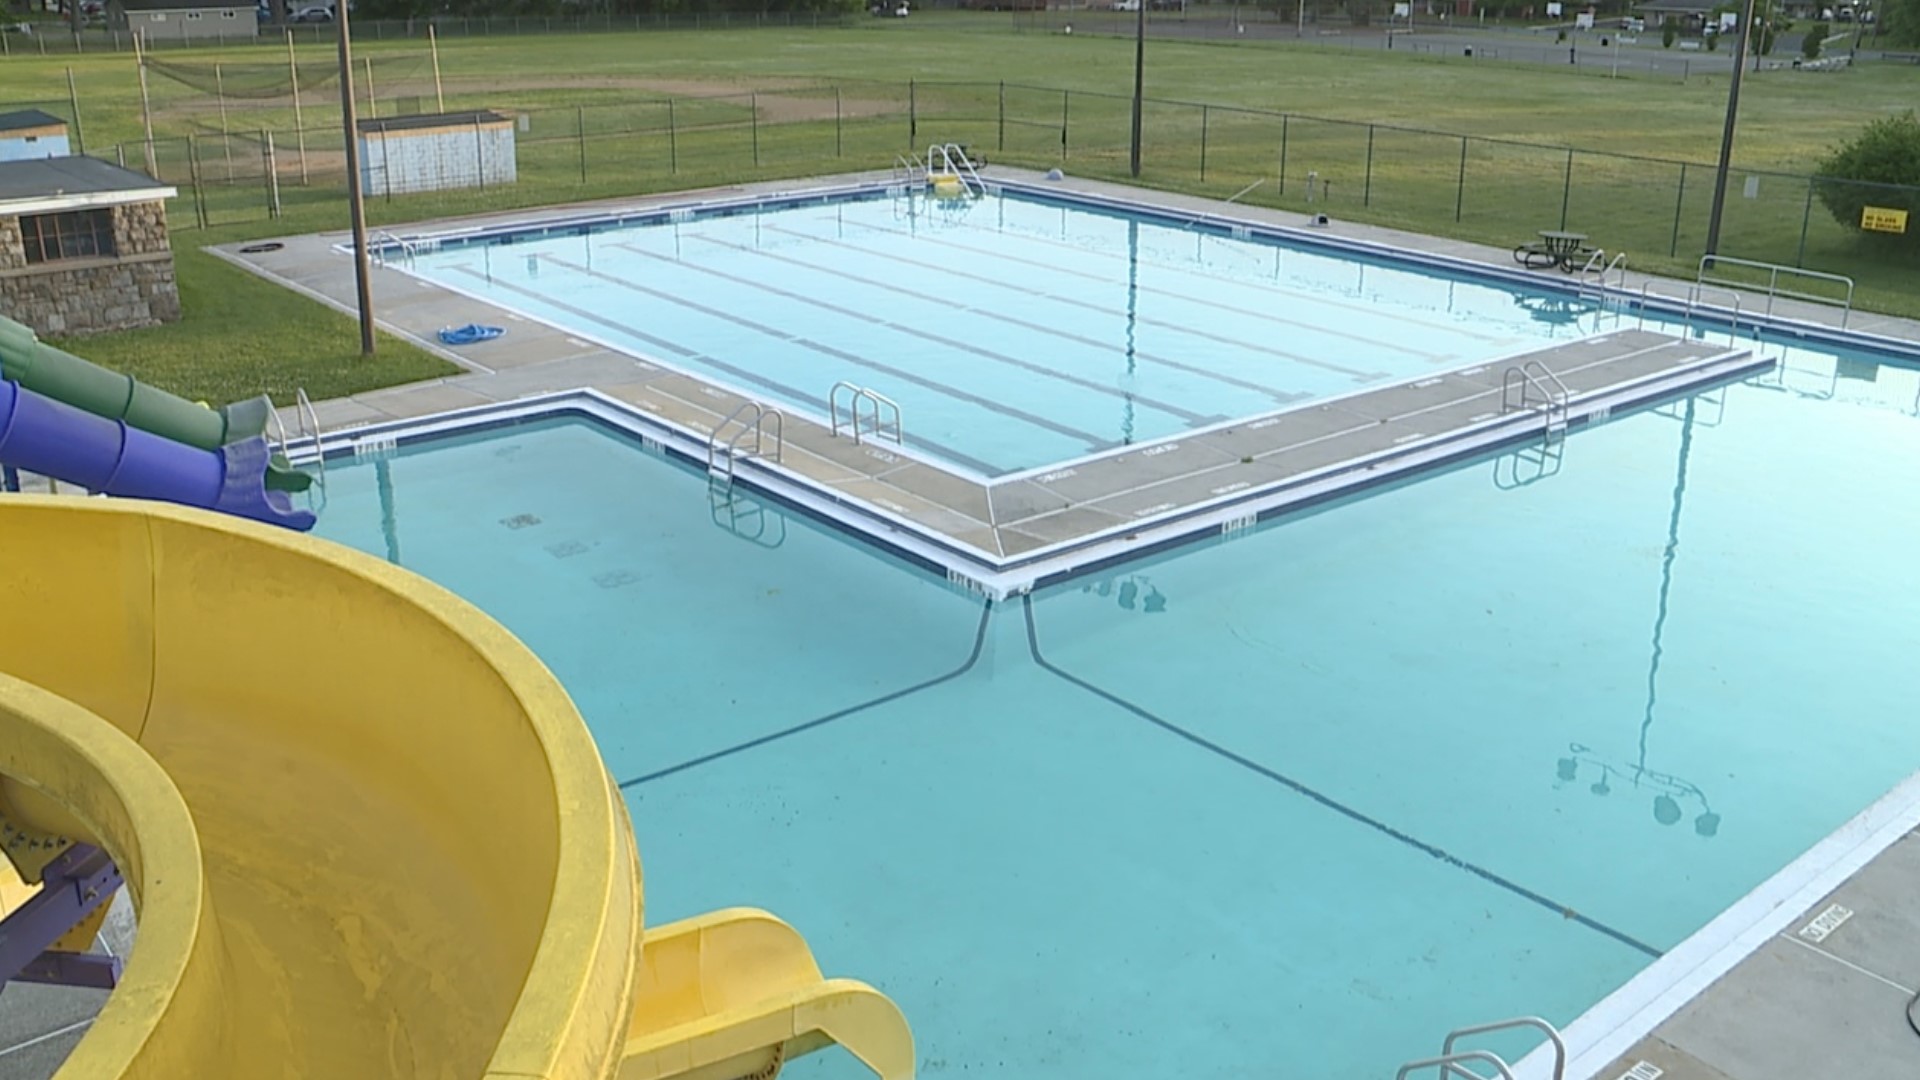 The Dansbury Park and Stroudsburg borough pools are set to open the weekend of June 10. About 10 more lifeguards are still needed to fully staff both pools.